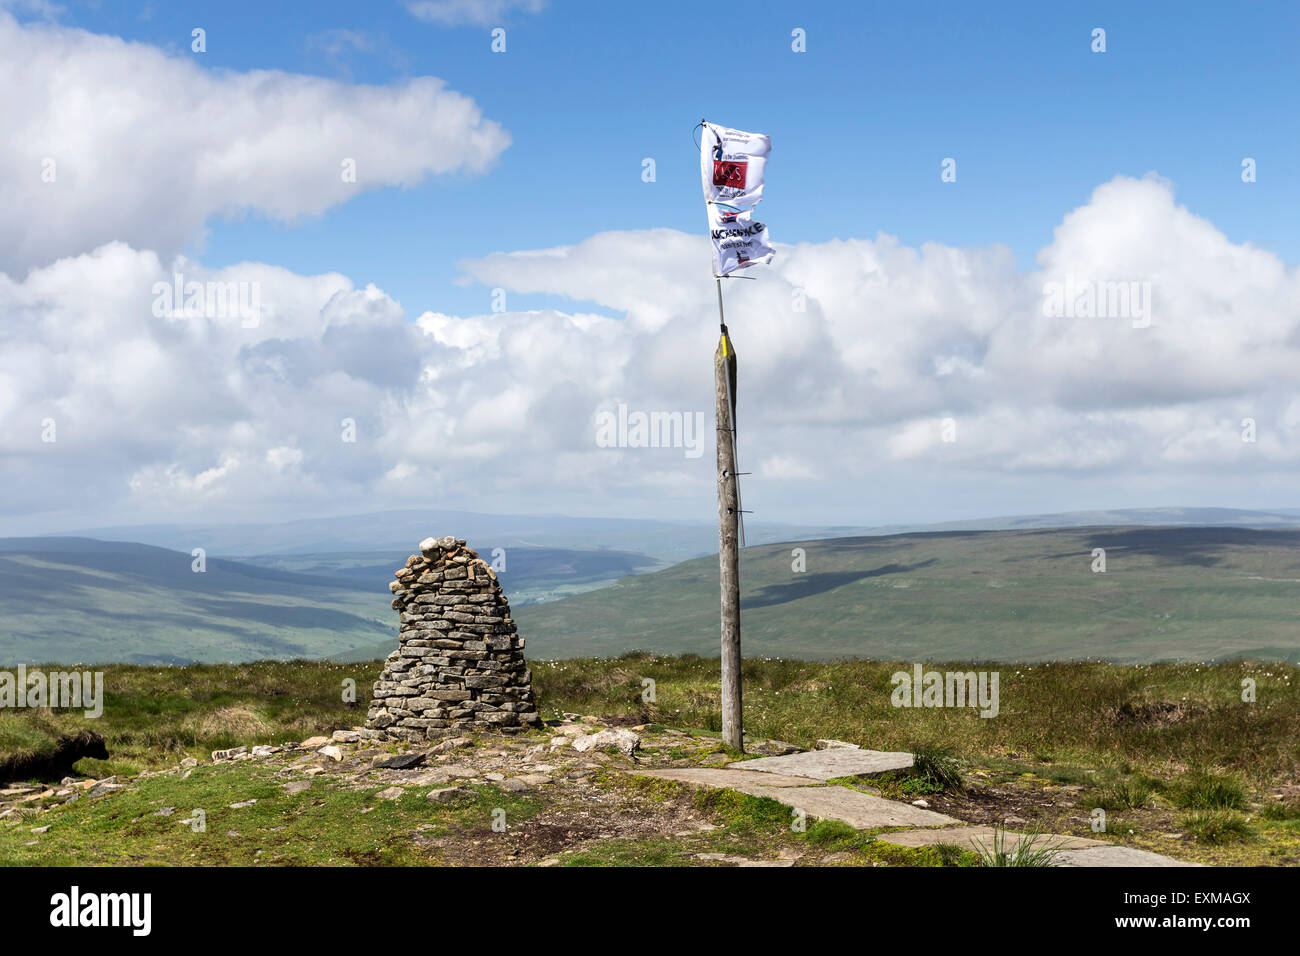 Cairn and 3 Peaks Challenge Flag on the Summit of Buckden Pike, Upper Wharfedale. Yorkshire Dales UK Stock Photo